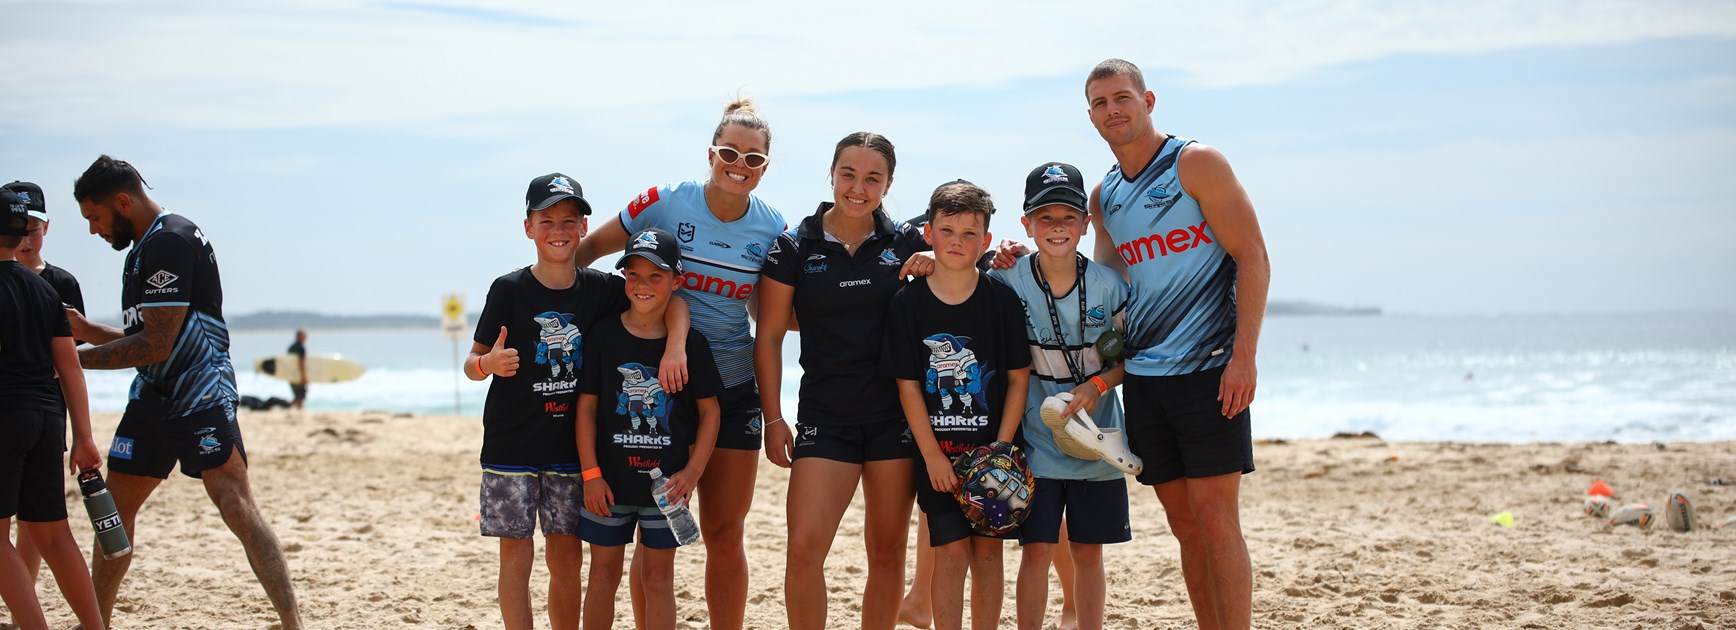 Kids flock to beach for Footy and Surf clinic